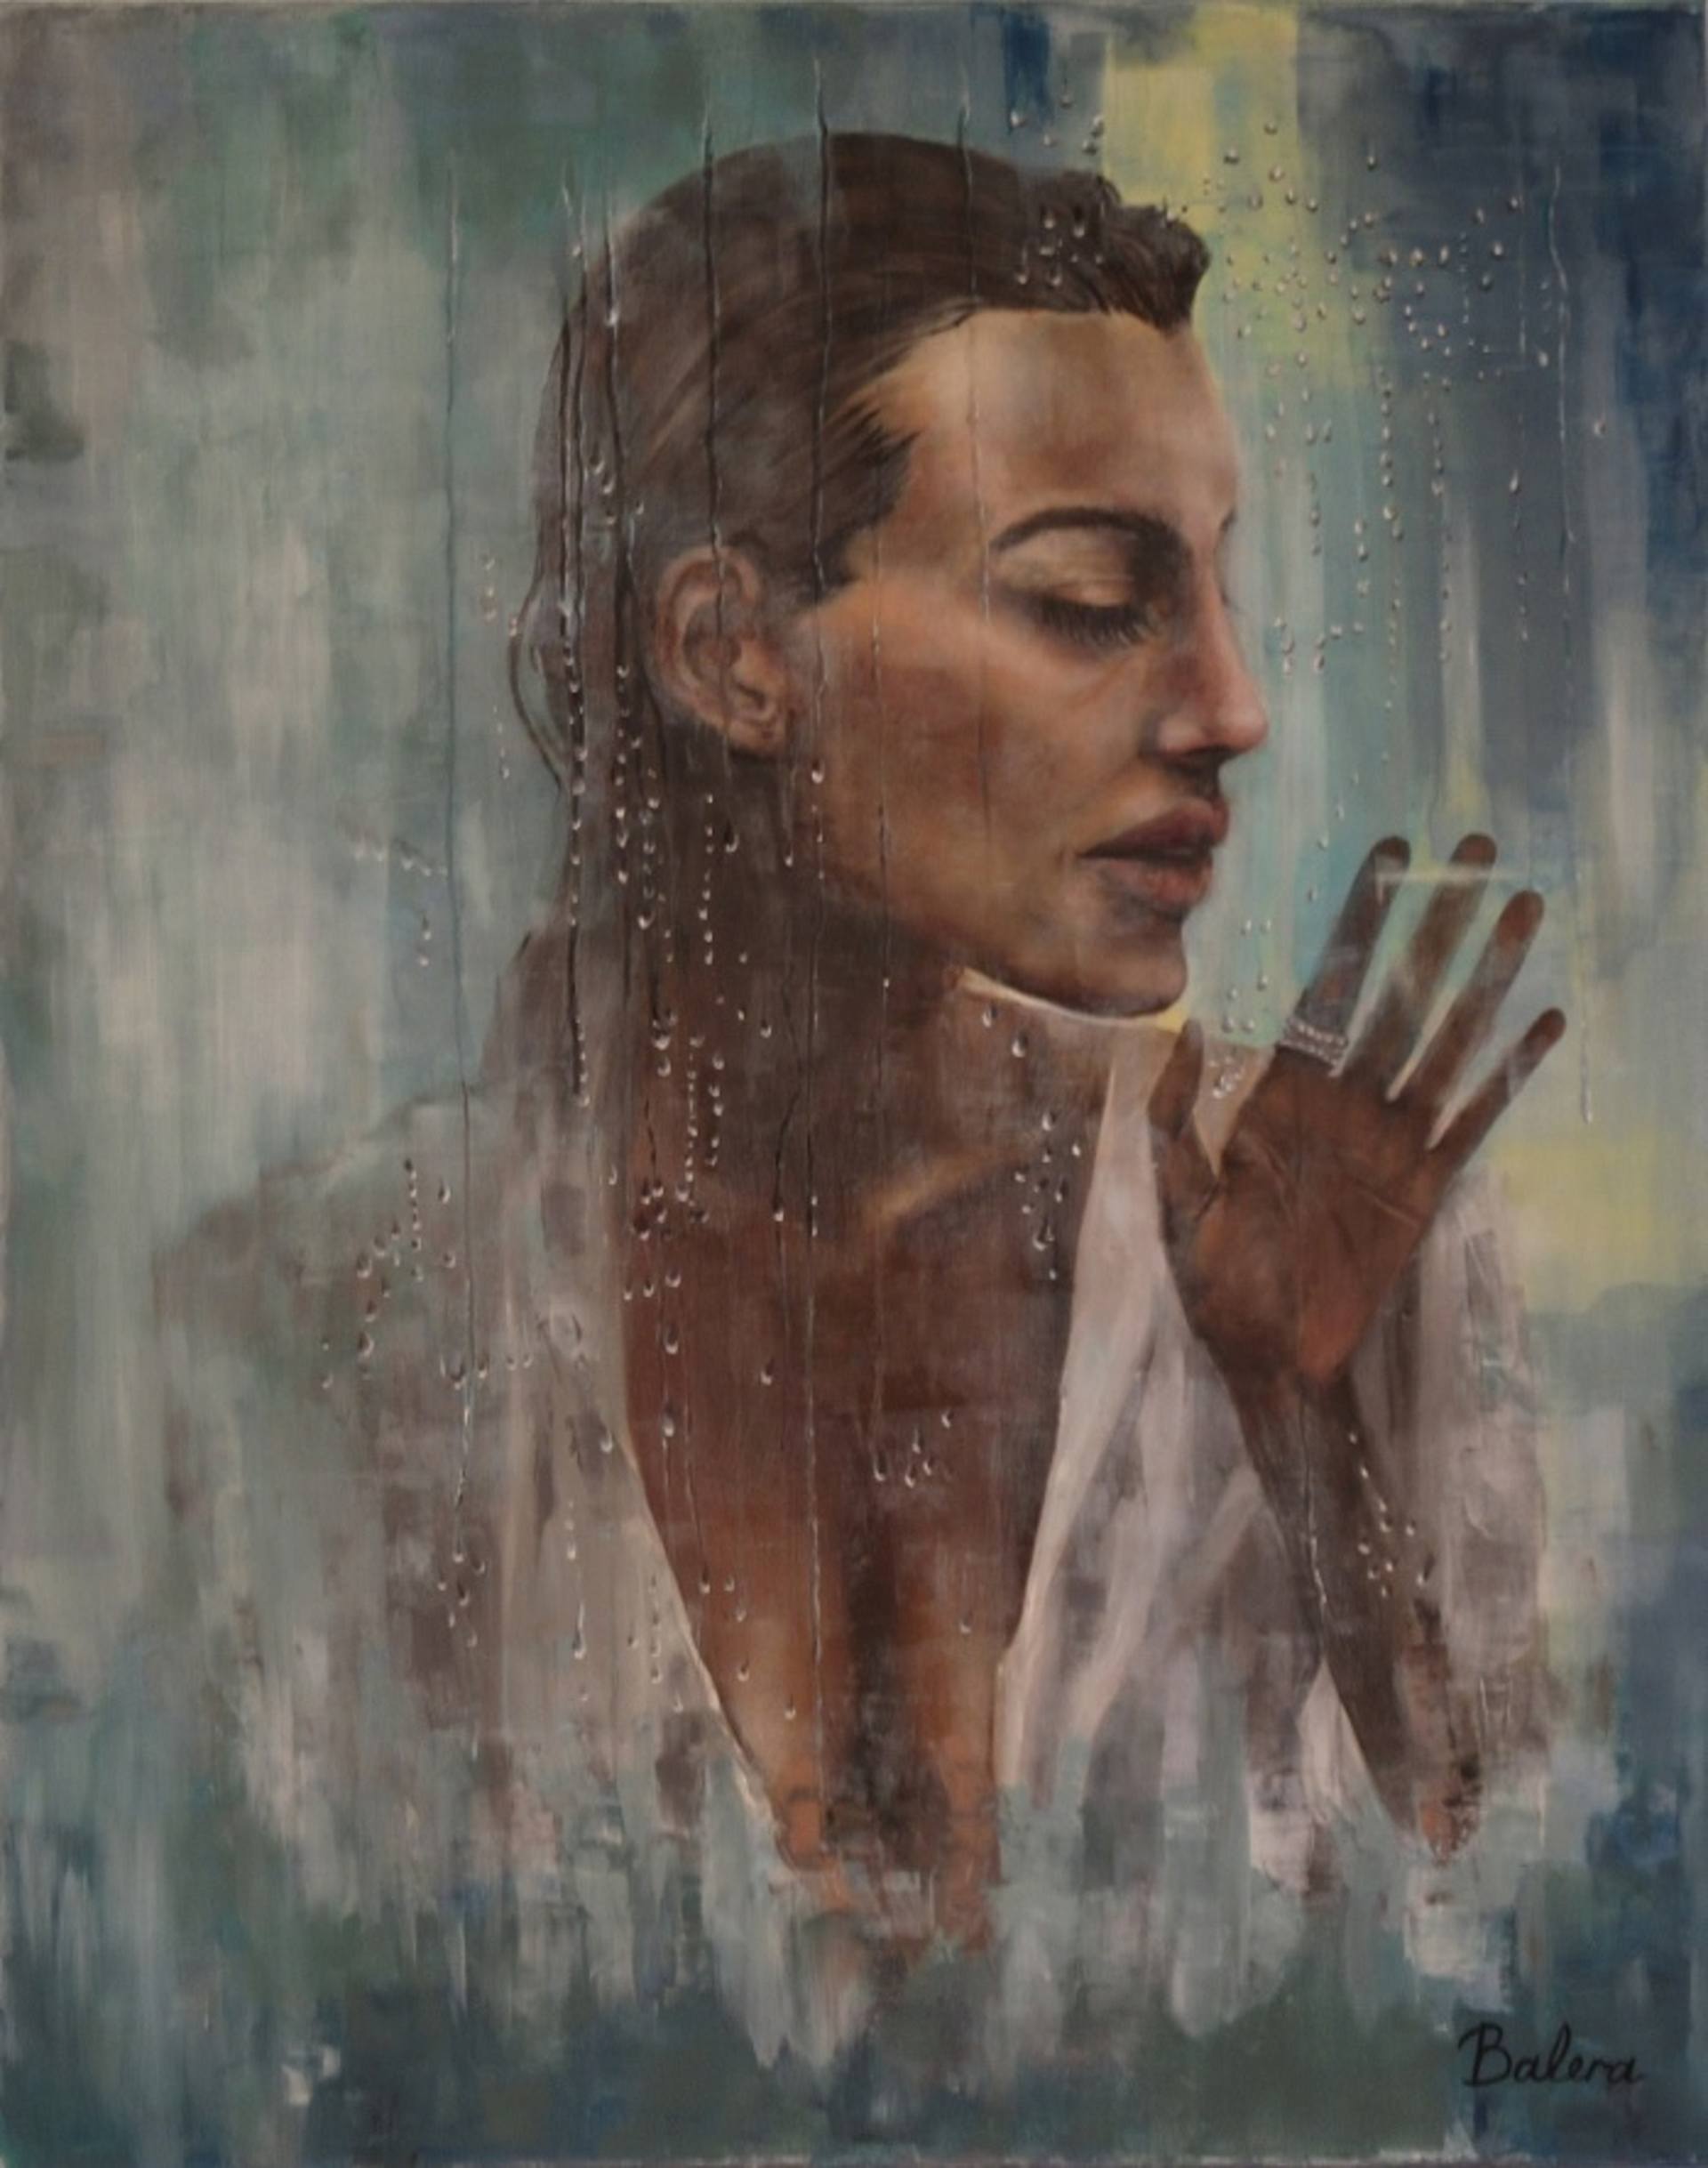 Painting Trapped in tears